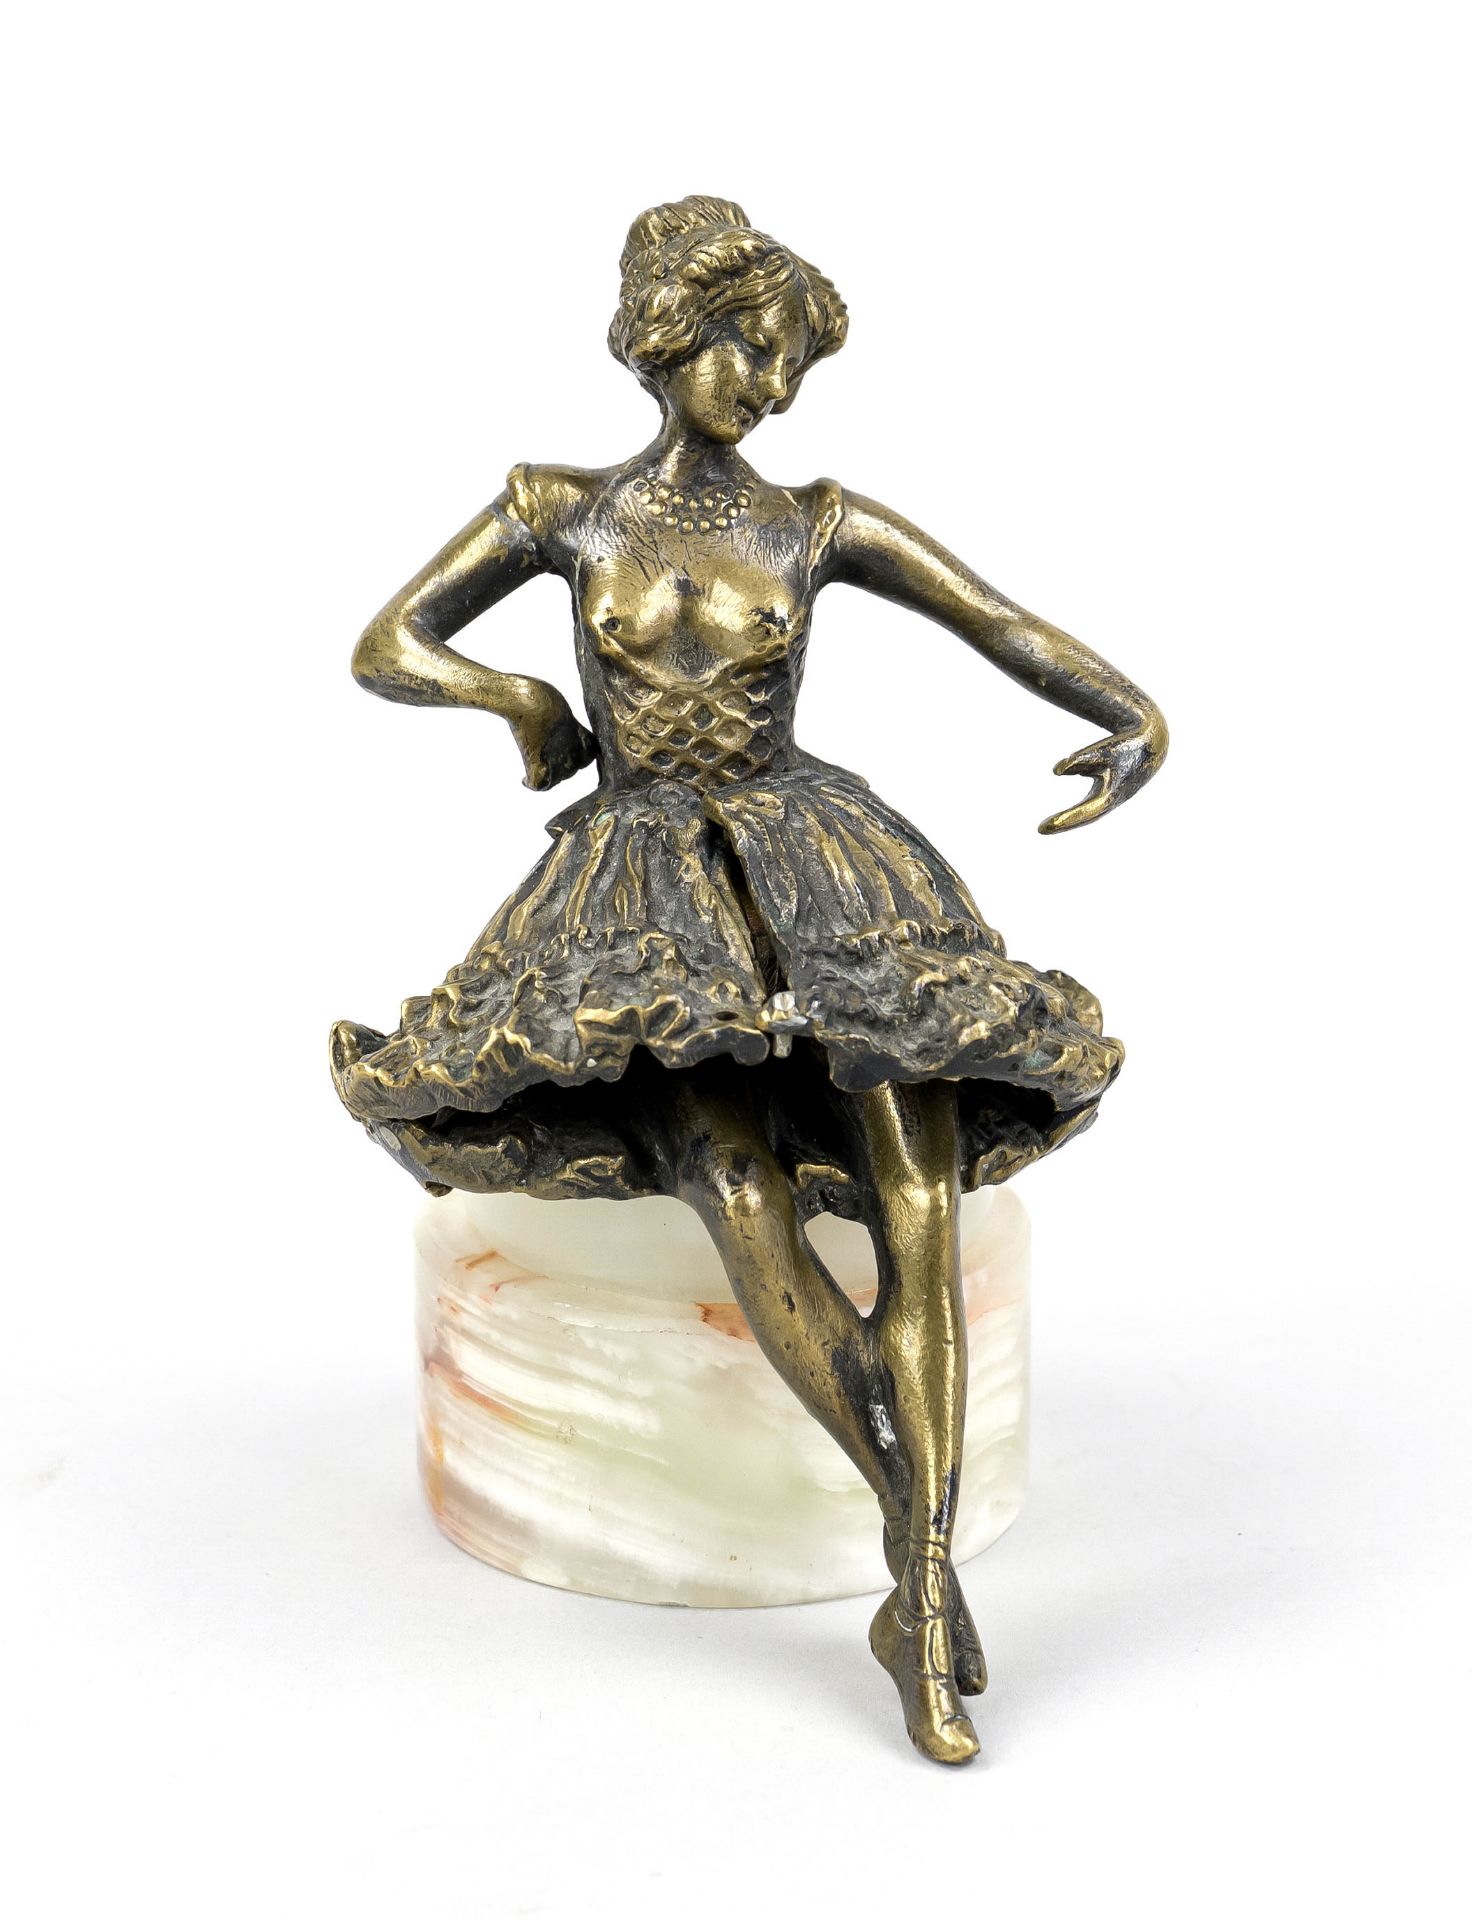 Bronze figure in the style of erotic Viennese bronzes, mid 20th century, seated woman with skirt - Image 2 of 2